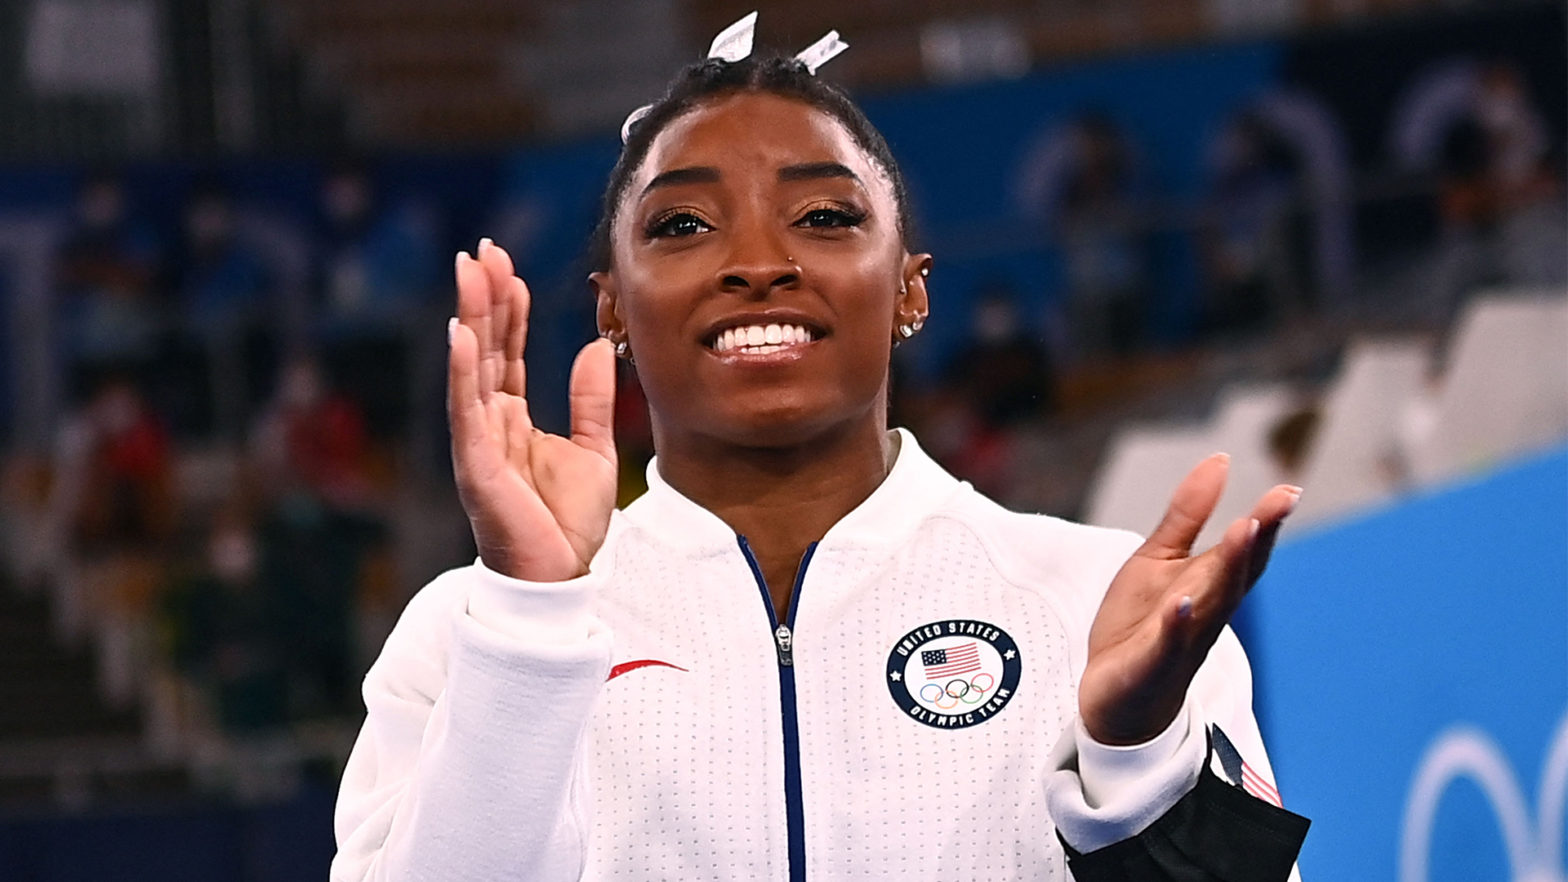 Simone Biles Plans To Make Mental Health Resources Accessible As Chief Impact Officer Of Cerebral